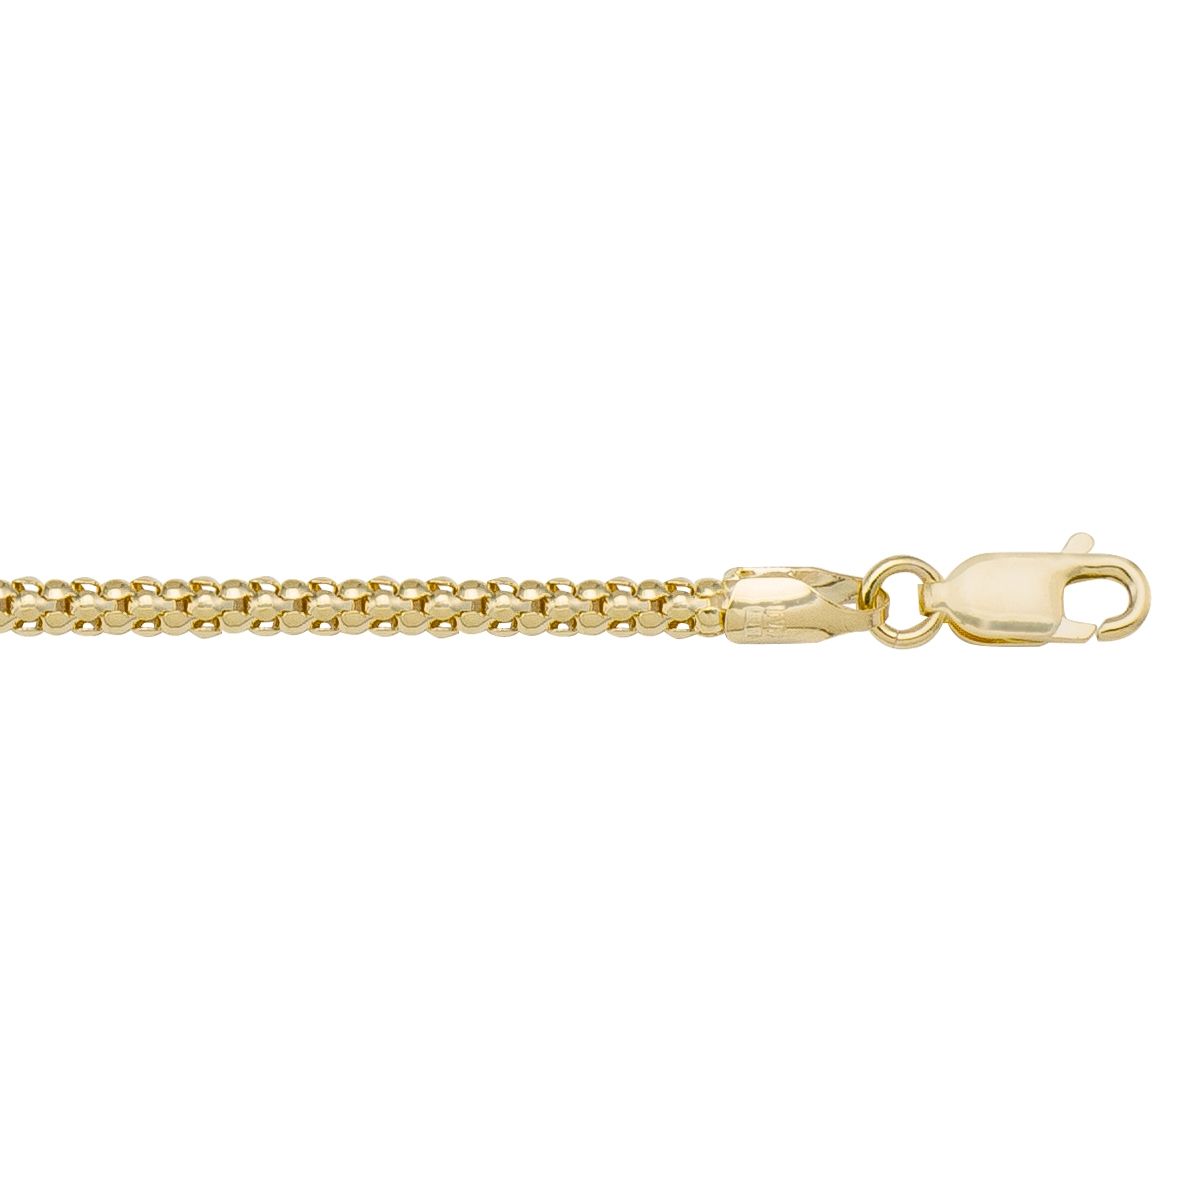 CPOP01, Gold Chain, Popcorn, Yellow Gold